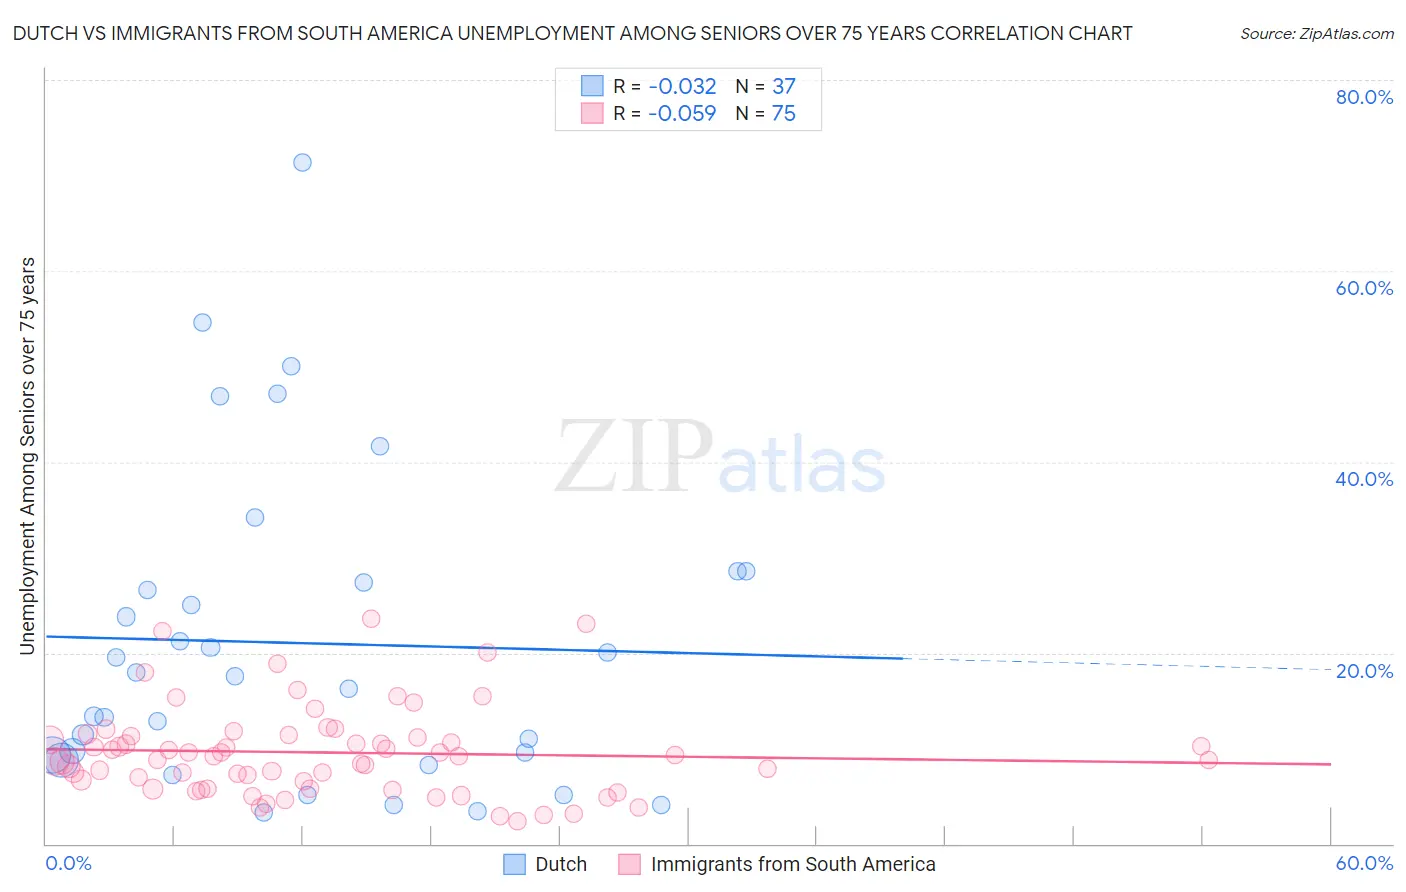 Dutch vs Immigrants from South America Unemployment Among Seniors over 75 years